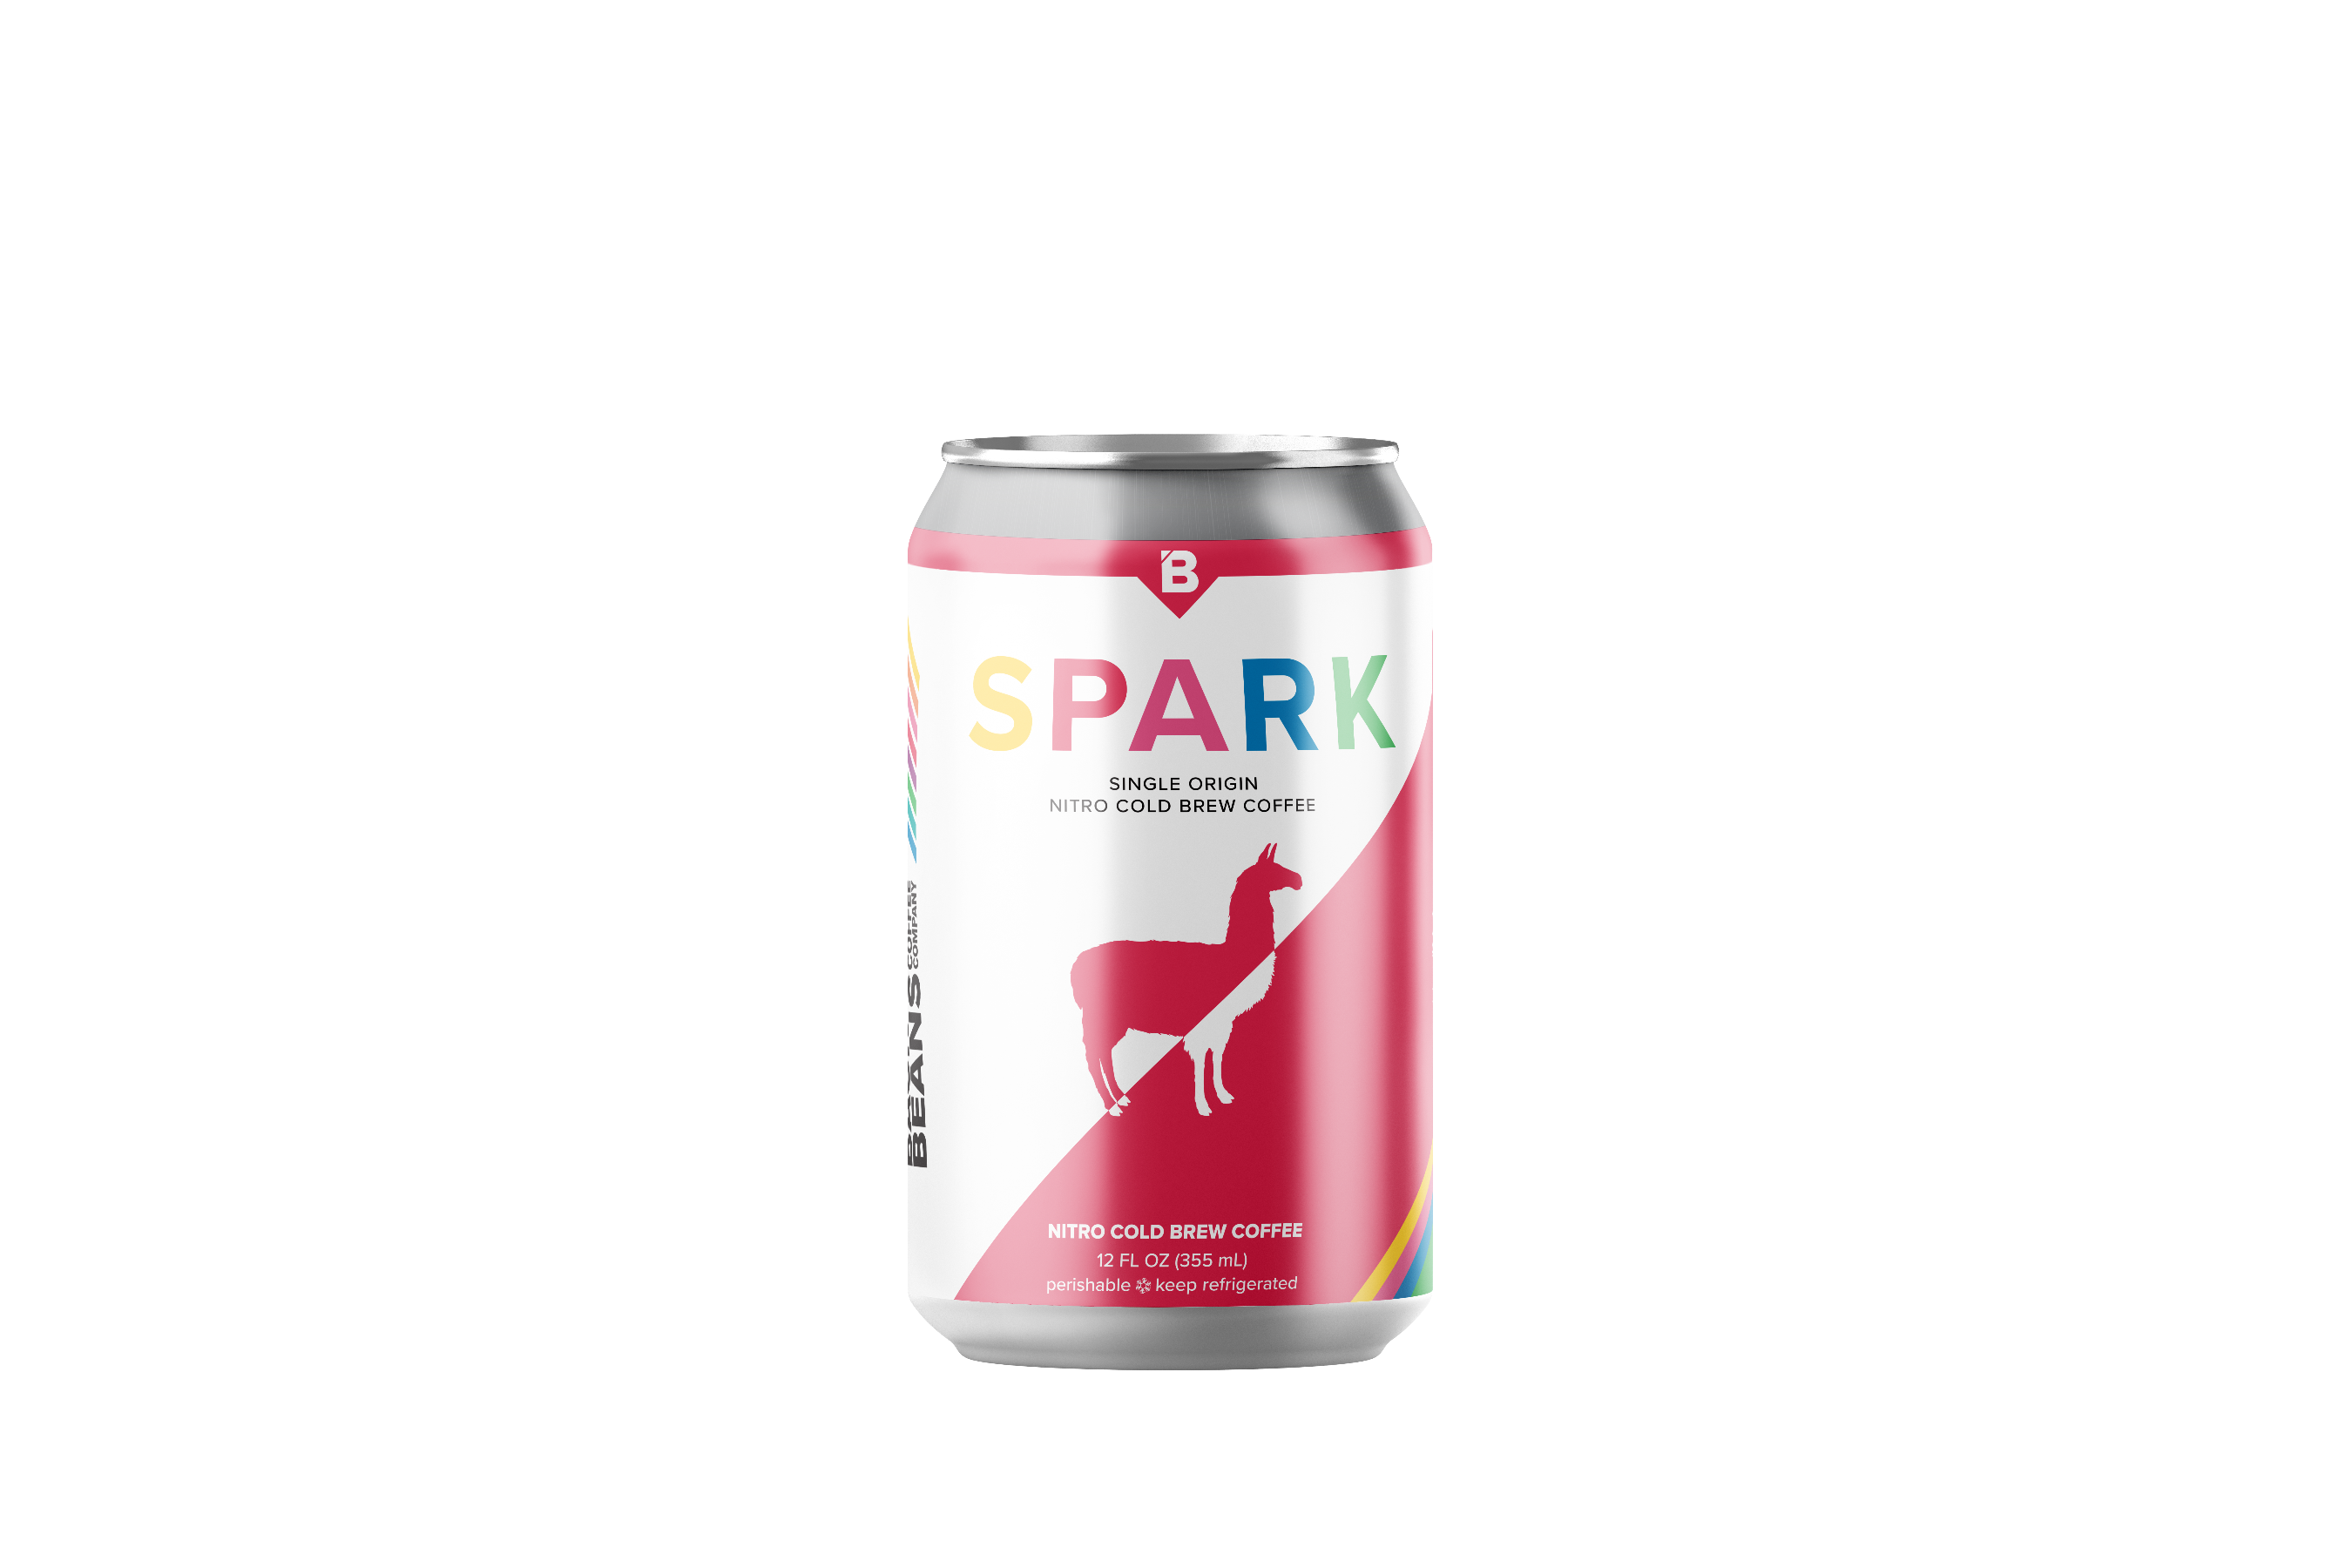 Image of Spark Cold Brew can.